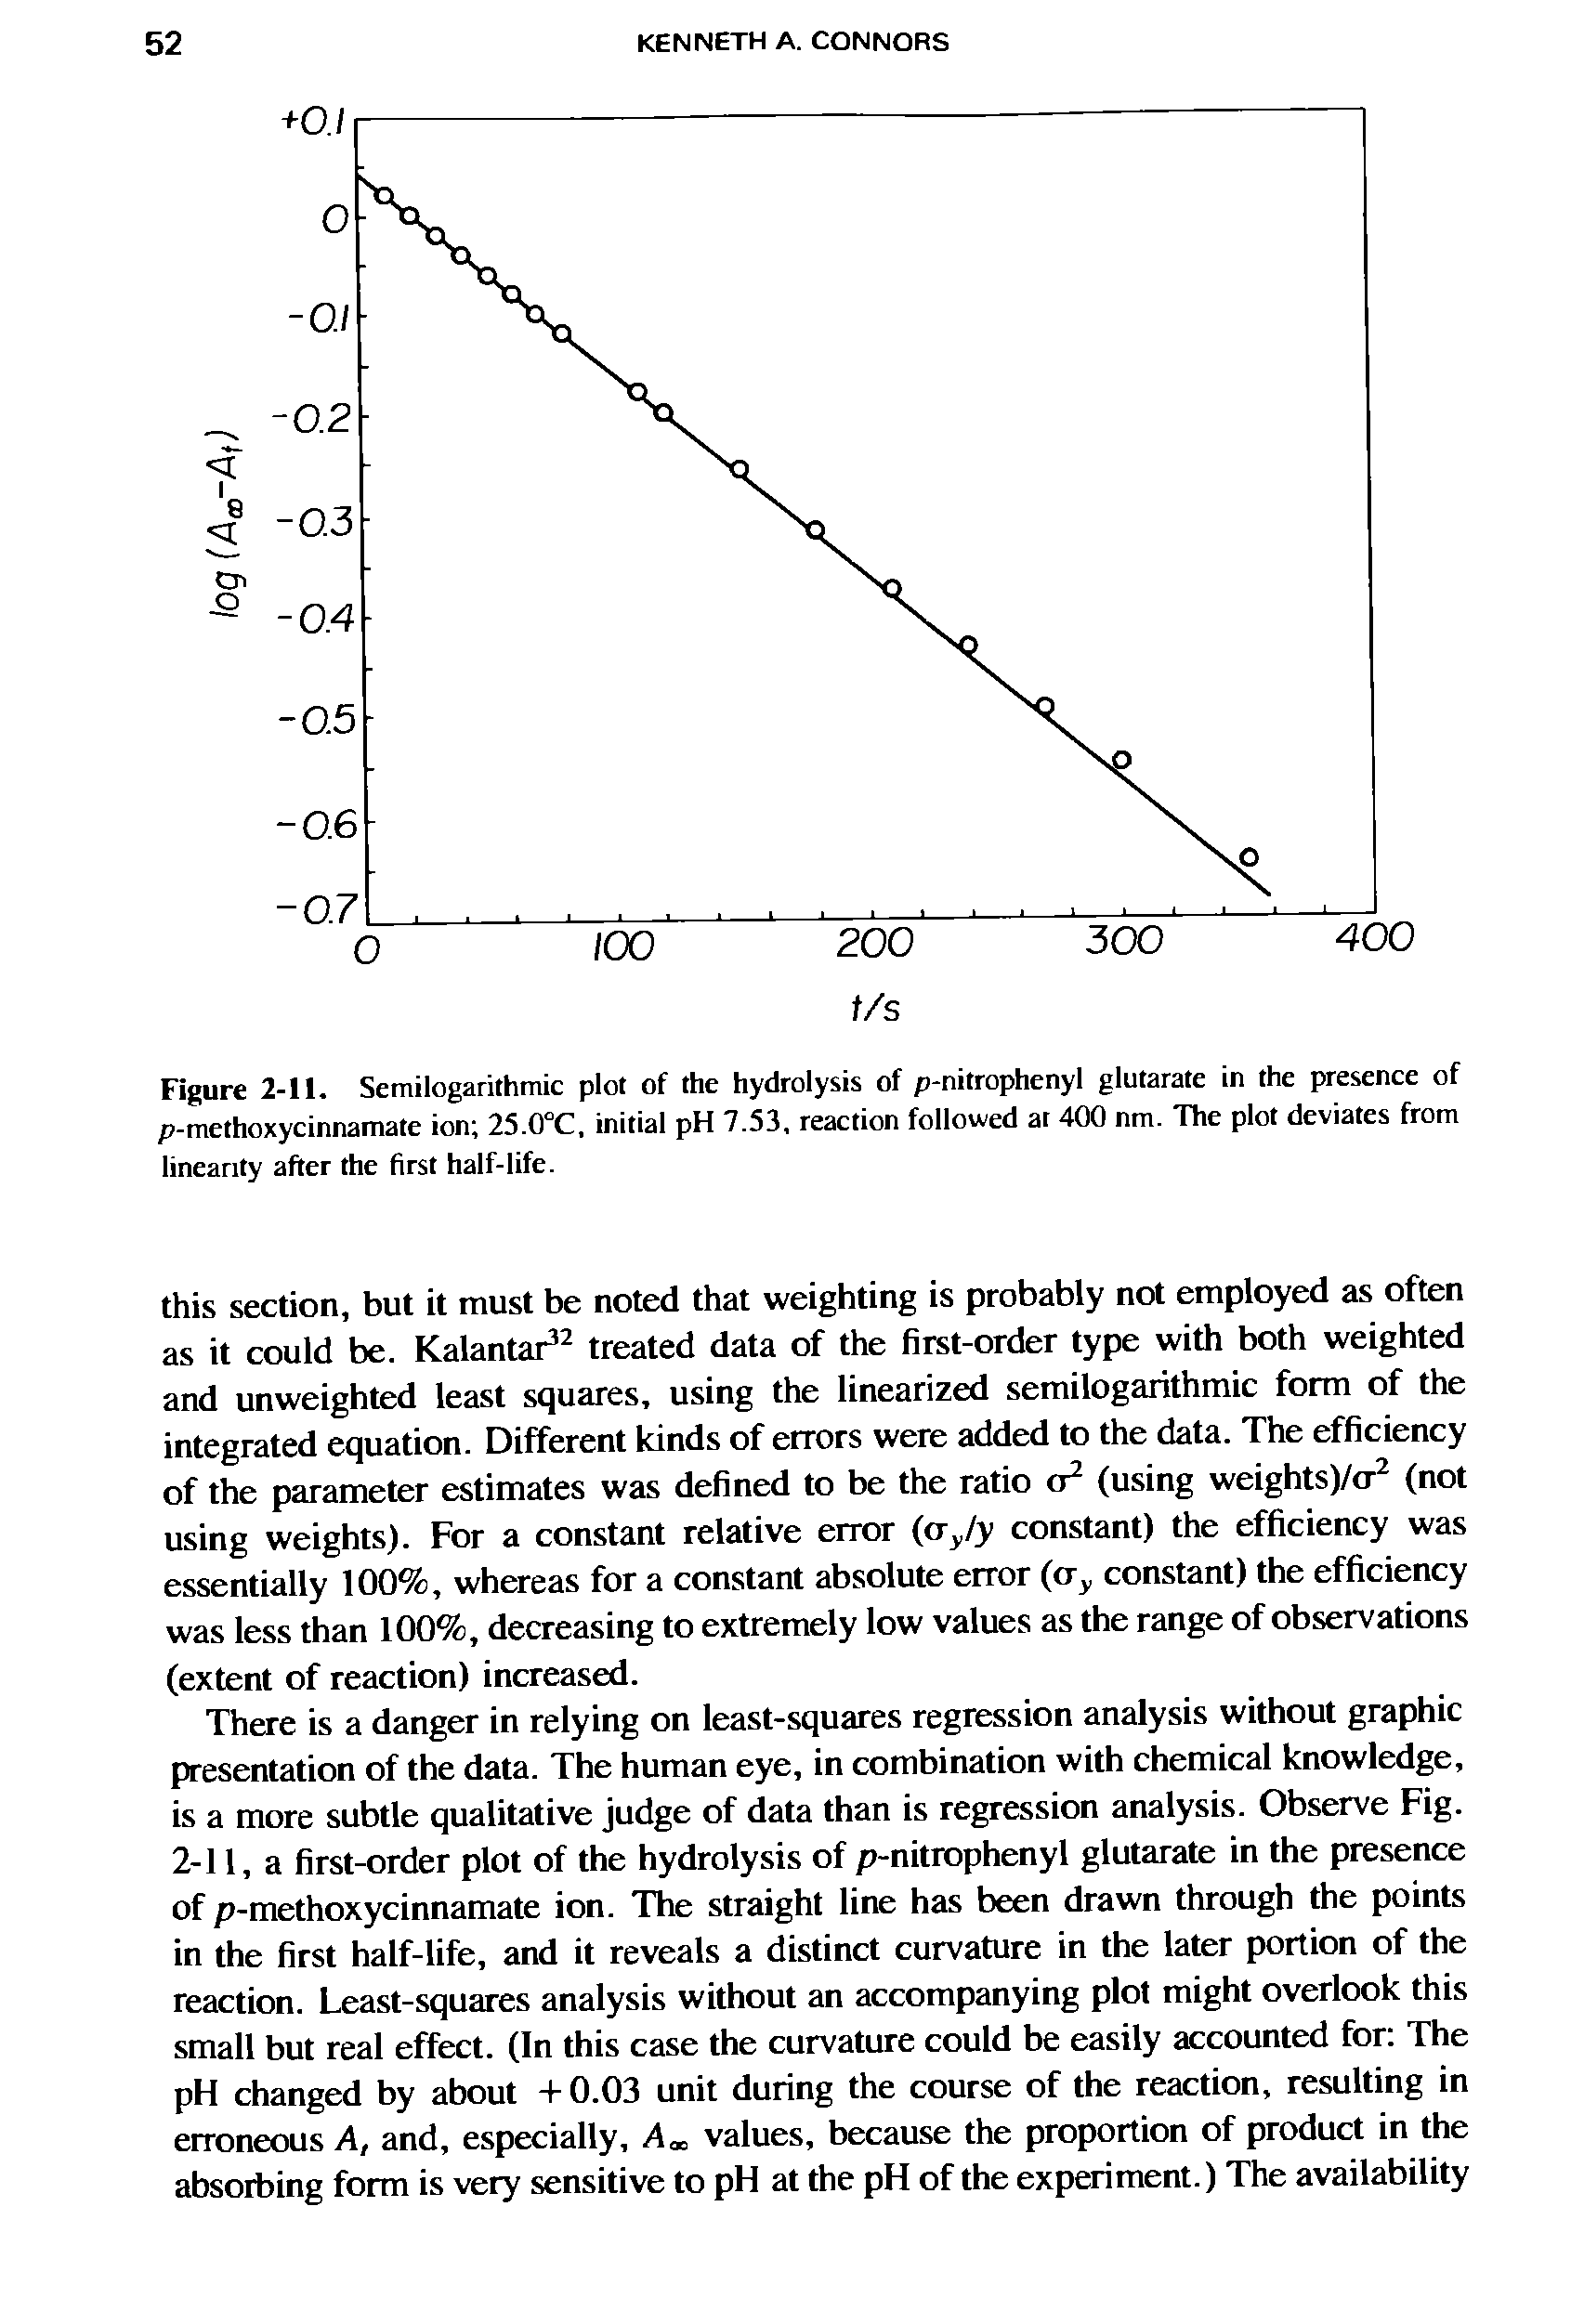 Figure 2-11, Semilogarithmic plot of the hydrolysis of p-nitrophenyl glutarate in the presenee of p-methoxycinnamate ion 25.0°C, initial pH 7.53, reaction followed at 400 nm. The plot deviates from linearity after the first half-life.